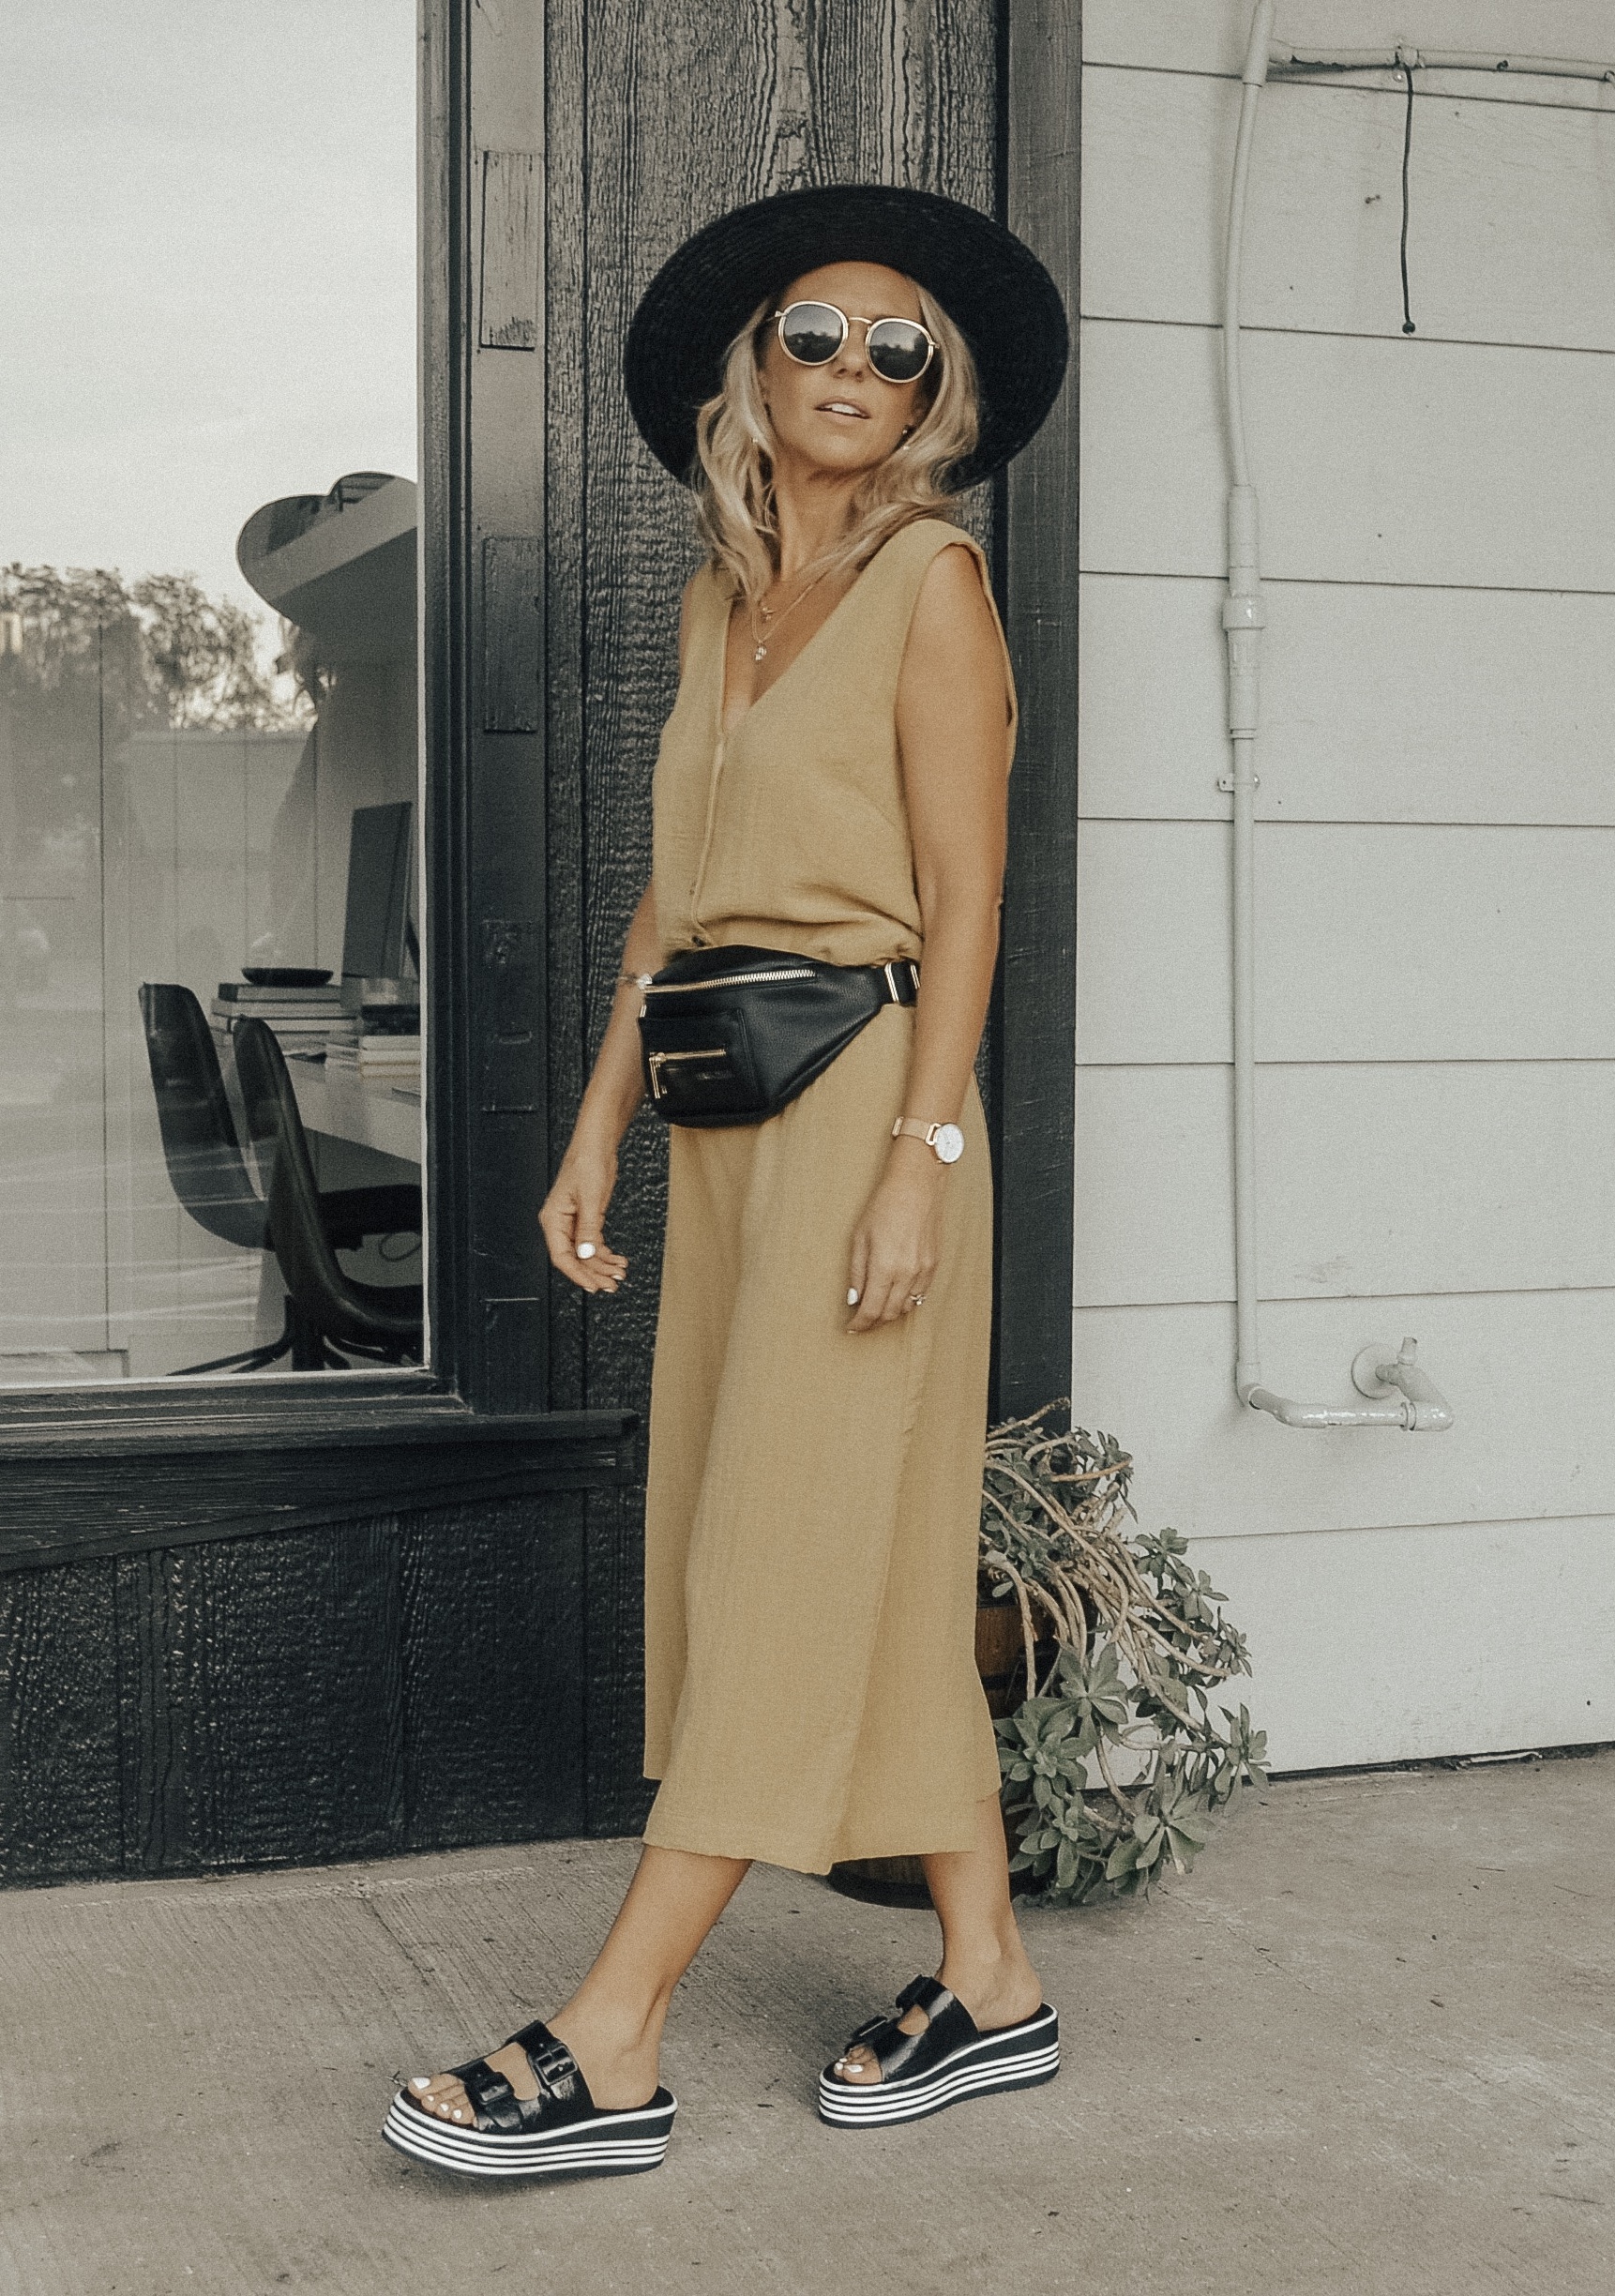 THE FANNY PACK IS BACK + 2 WAYS TO STYLE IT- Jaclyn De Leon Style + FAWN DESIGN FAWNY PACK + CASUAL STREET STYLE + MOM STYLE + BELT BAG + SUMMER OUTFIT + FALL STYLE + HOW TO STYLE A FANNY PACK + 90'S STYLE + RETRO LOOK + EDGY STREET STYLE LOOK +BLACK AND WHITE EMBROIDERED TOP + WHITE CULOTTES + YELLOW JUMPSUIT